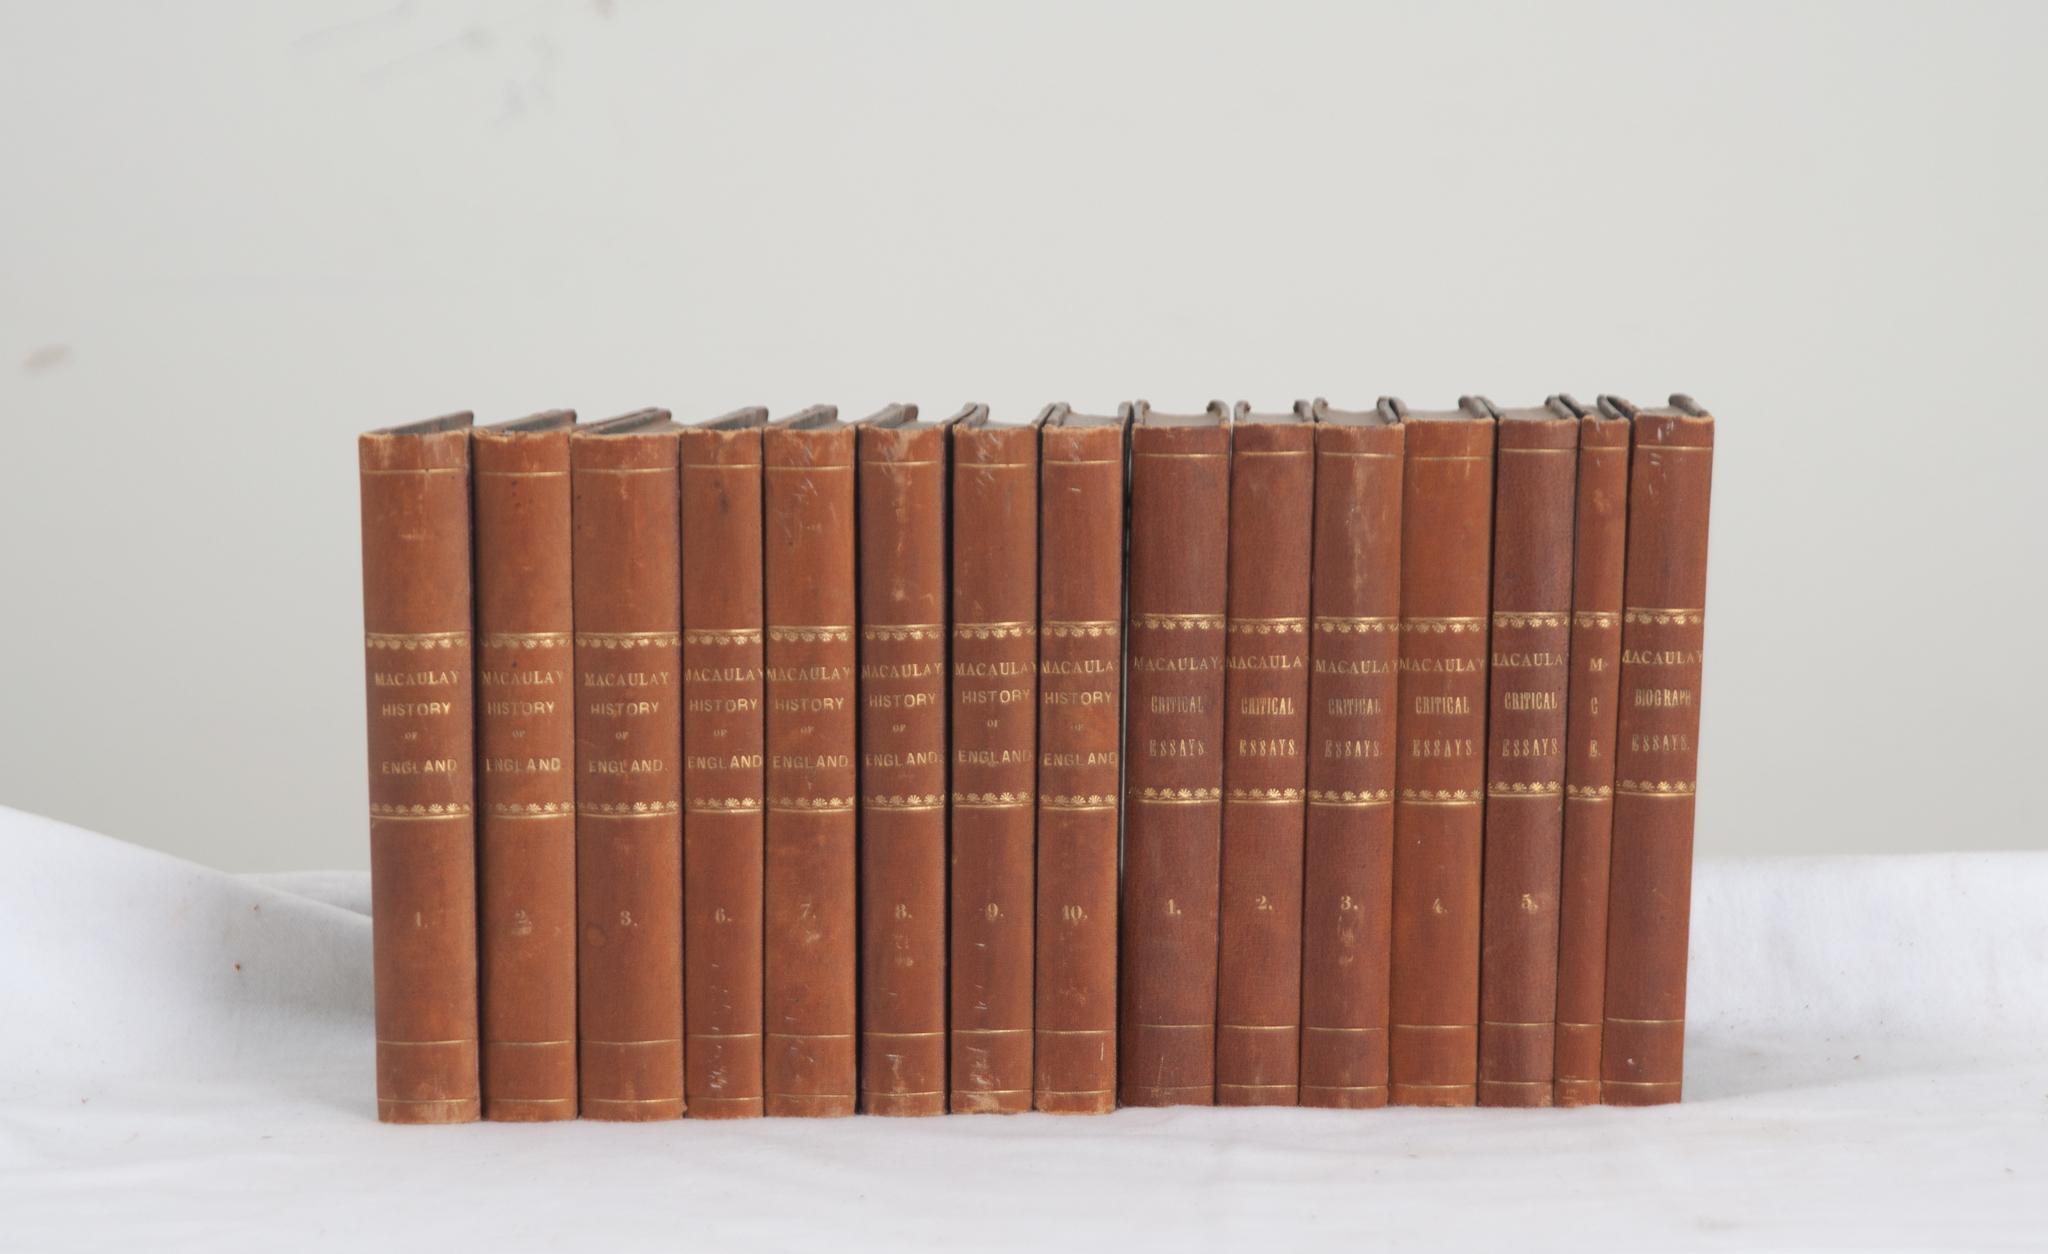 A fifteen volume collection of the Collection of British Authors. This set of books is bound in wrapped paper with gold lettering stating the author, title, and respective volume. Written in France from 1850, this set details the history of England.